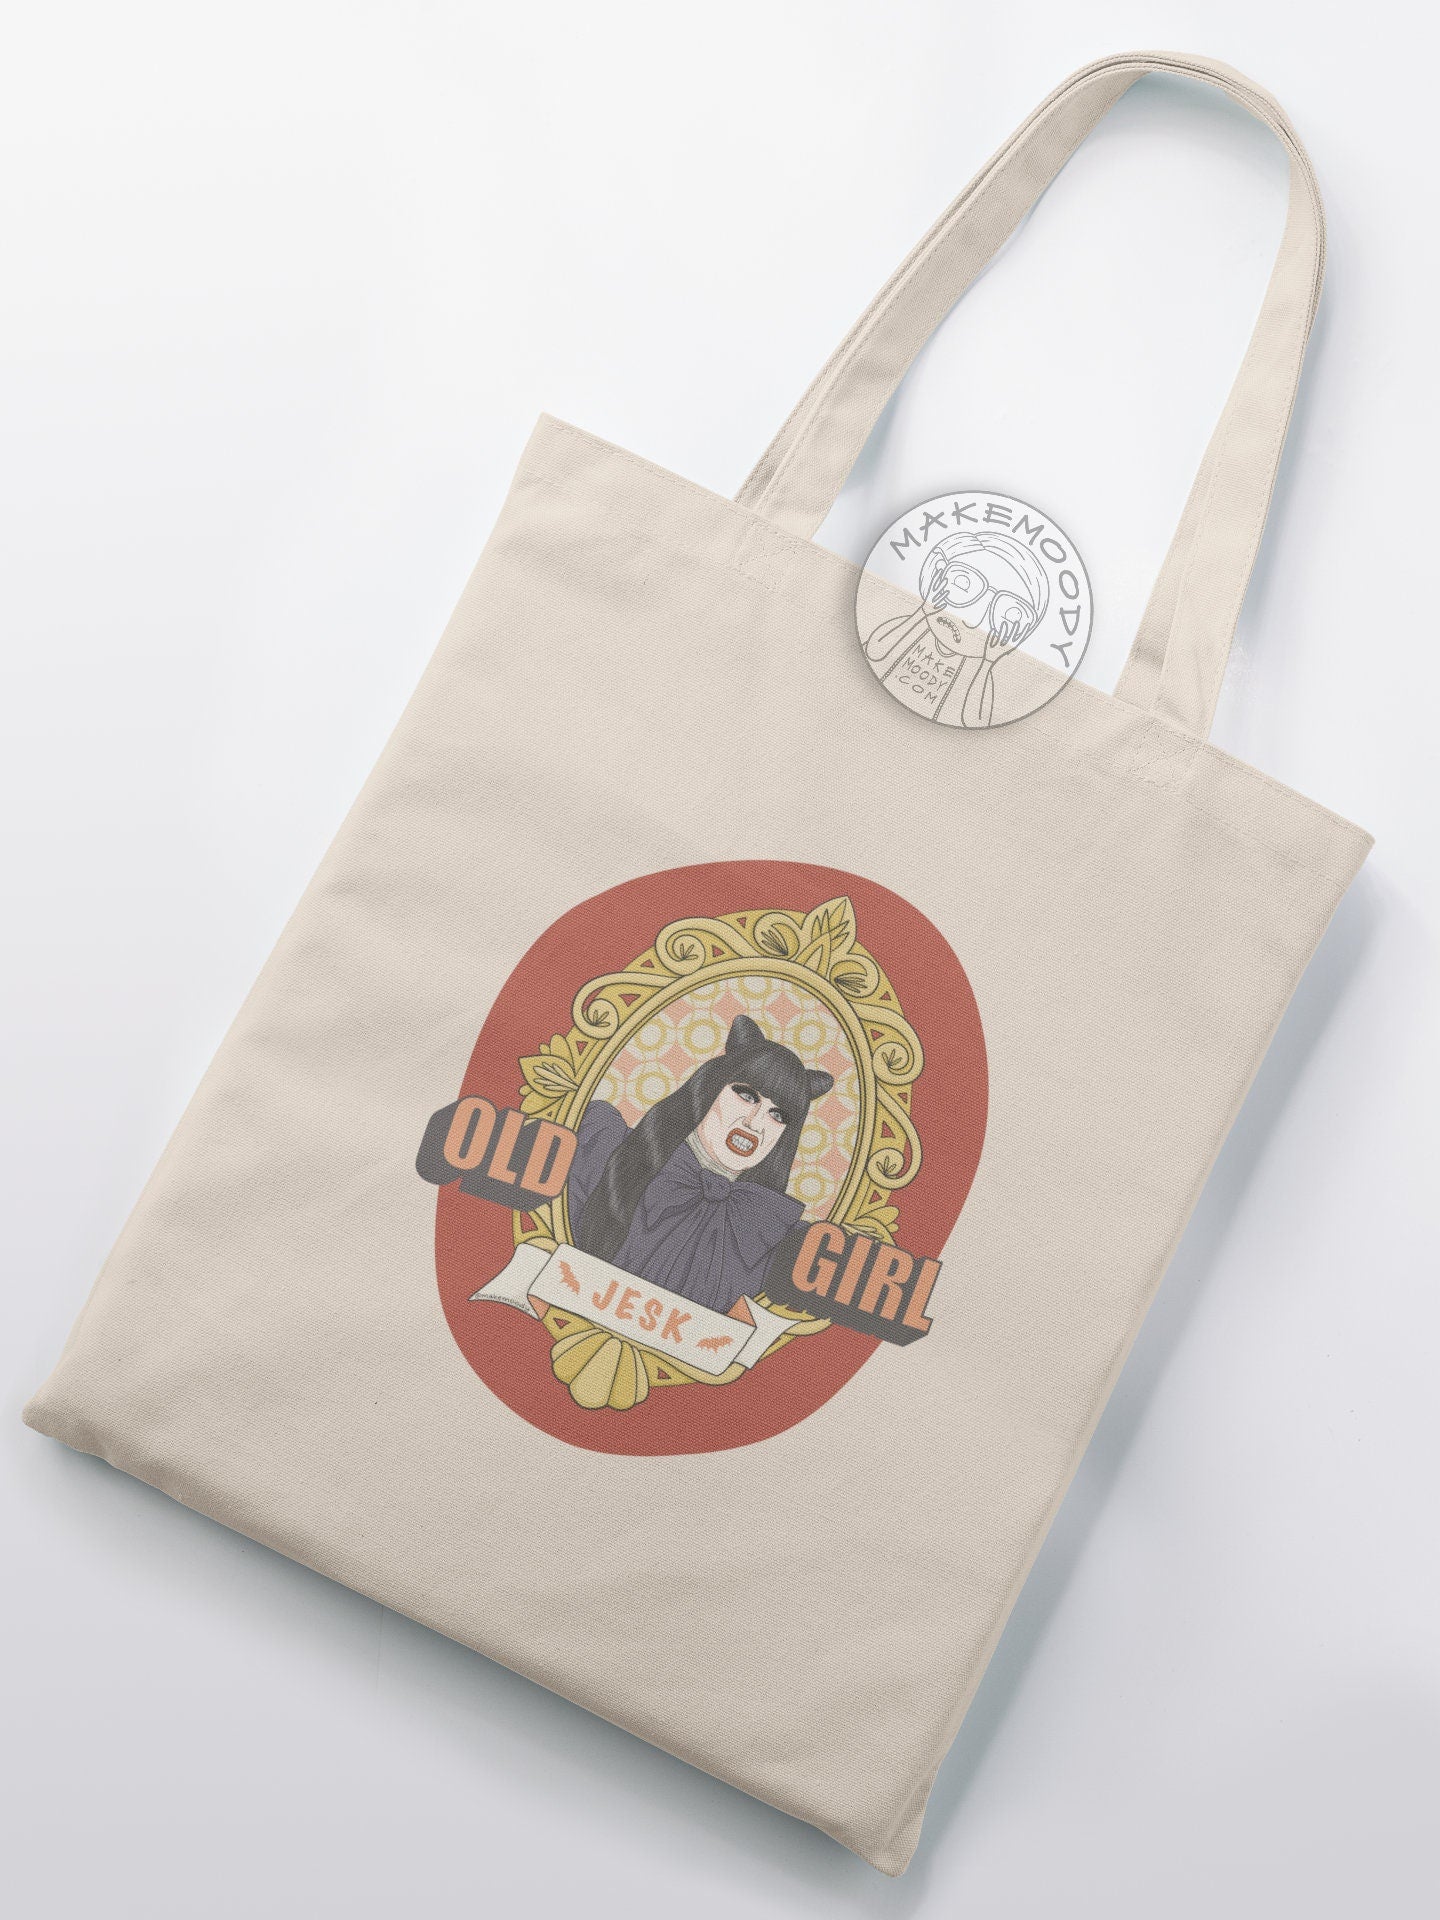 What We Do In The Shadows and New Girl Mashup TOTE BAG - Black Tote Bag - Jesk Tote Bag, WWDITS Tote Bag, New Girl Tote Bag, Nadja Tote Bag